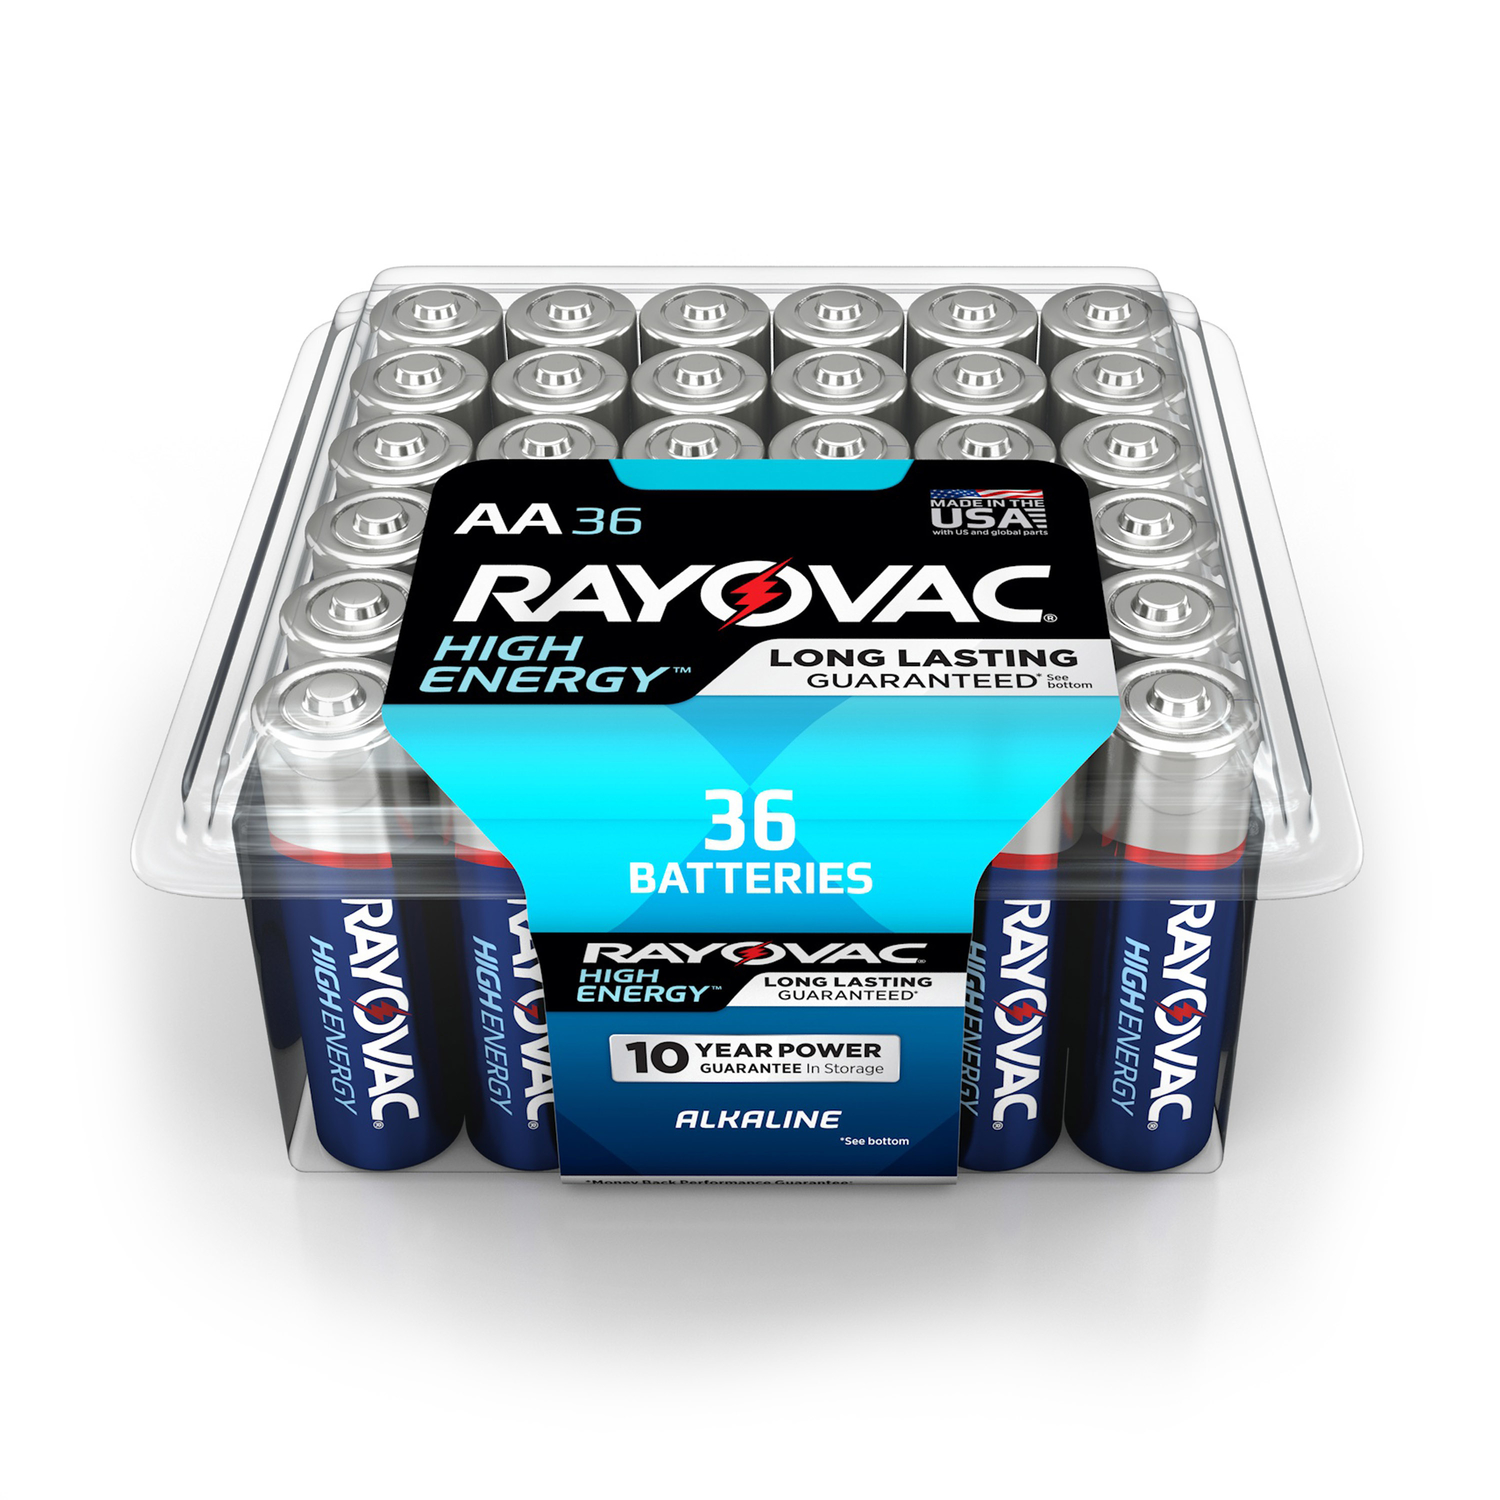 Photos - Household Switch Rayovac High Energy AA Alkaline Batteries 36 pk Clamshell 815-36PPK 